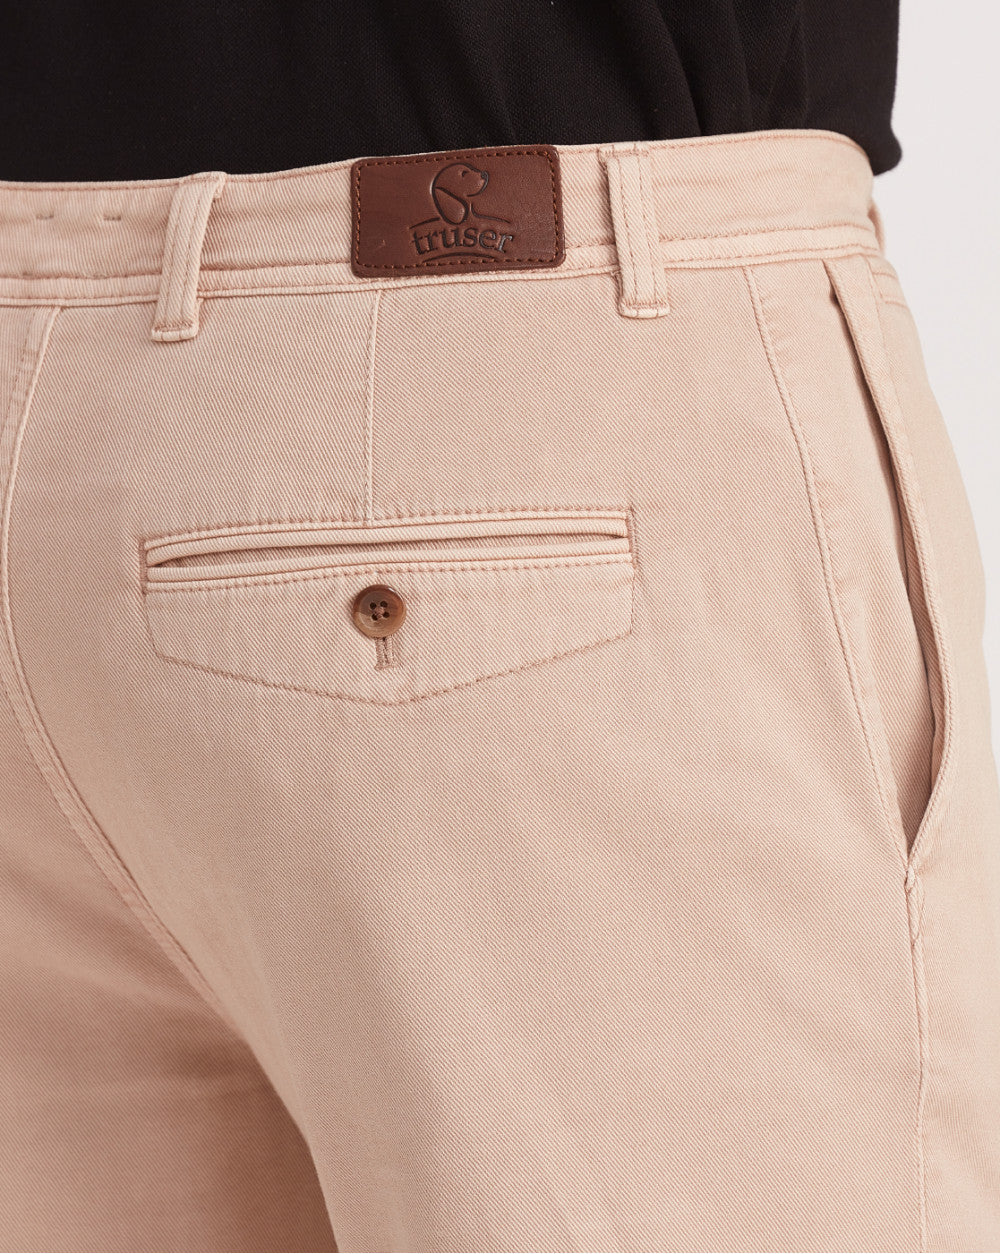 Tapered Fit Garment Dyed Chinos - Latte